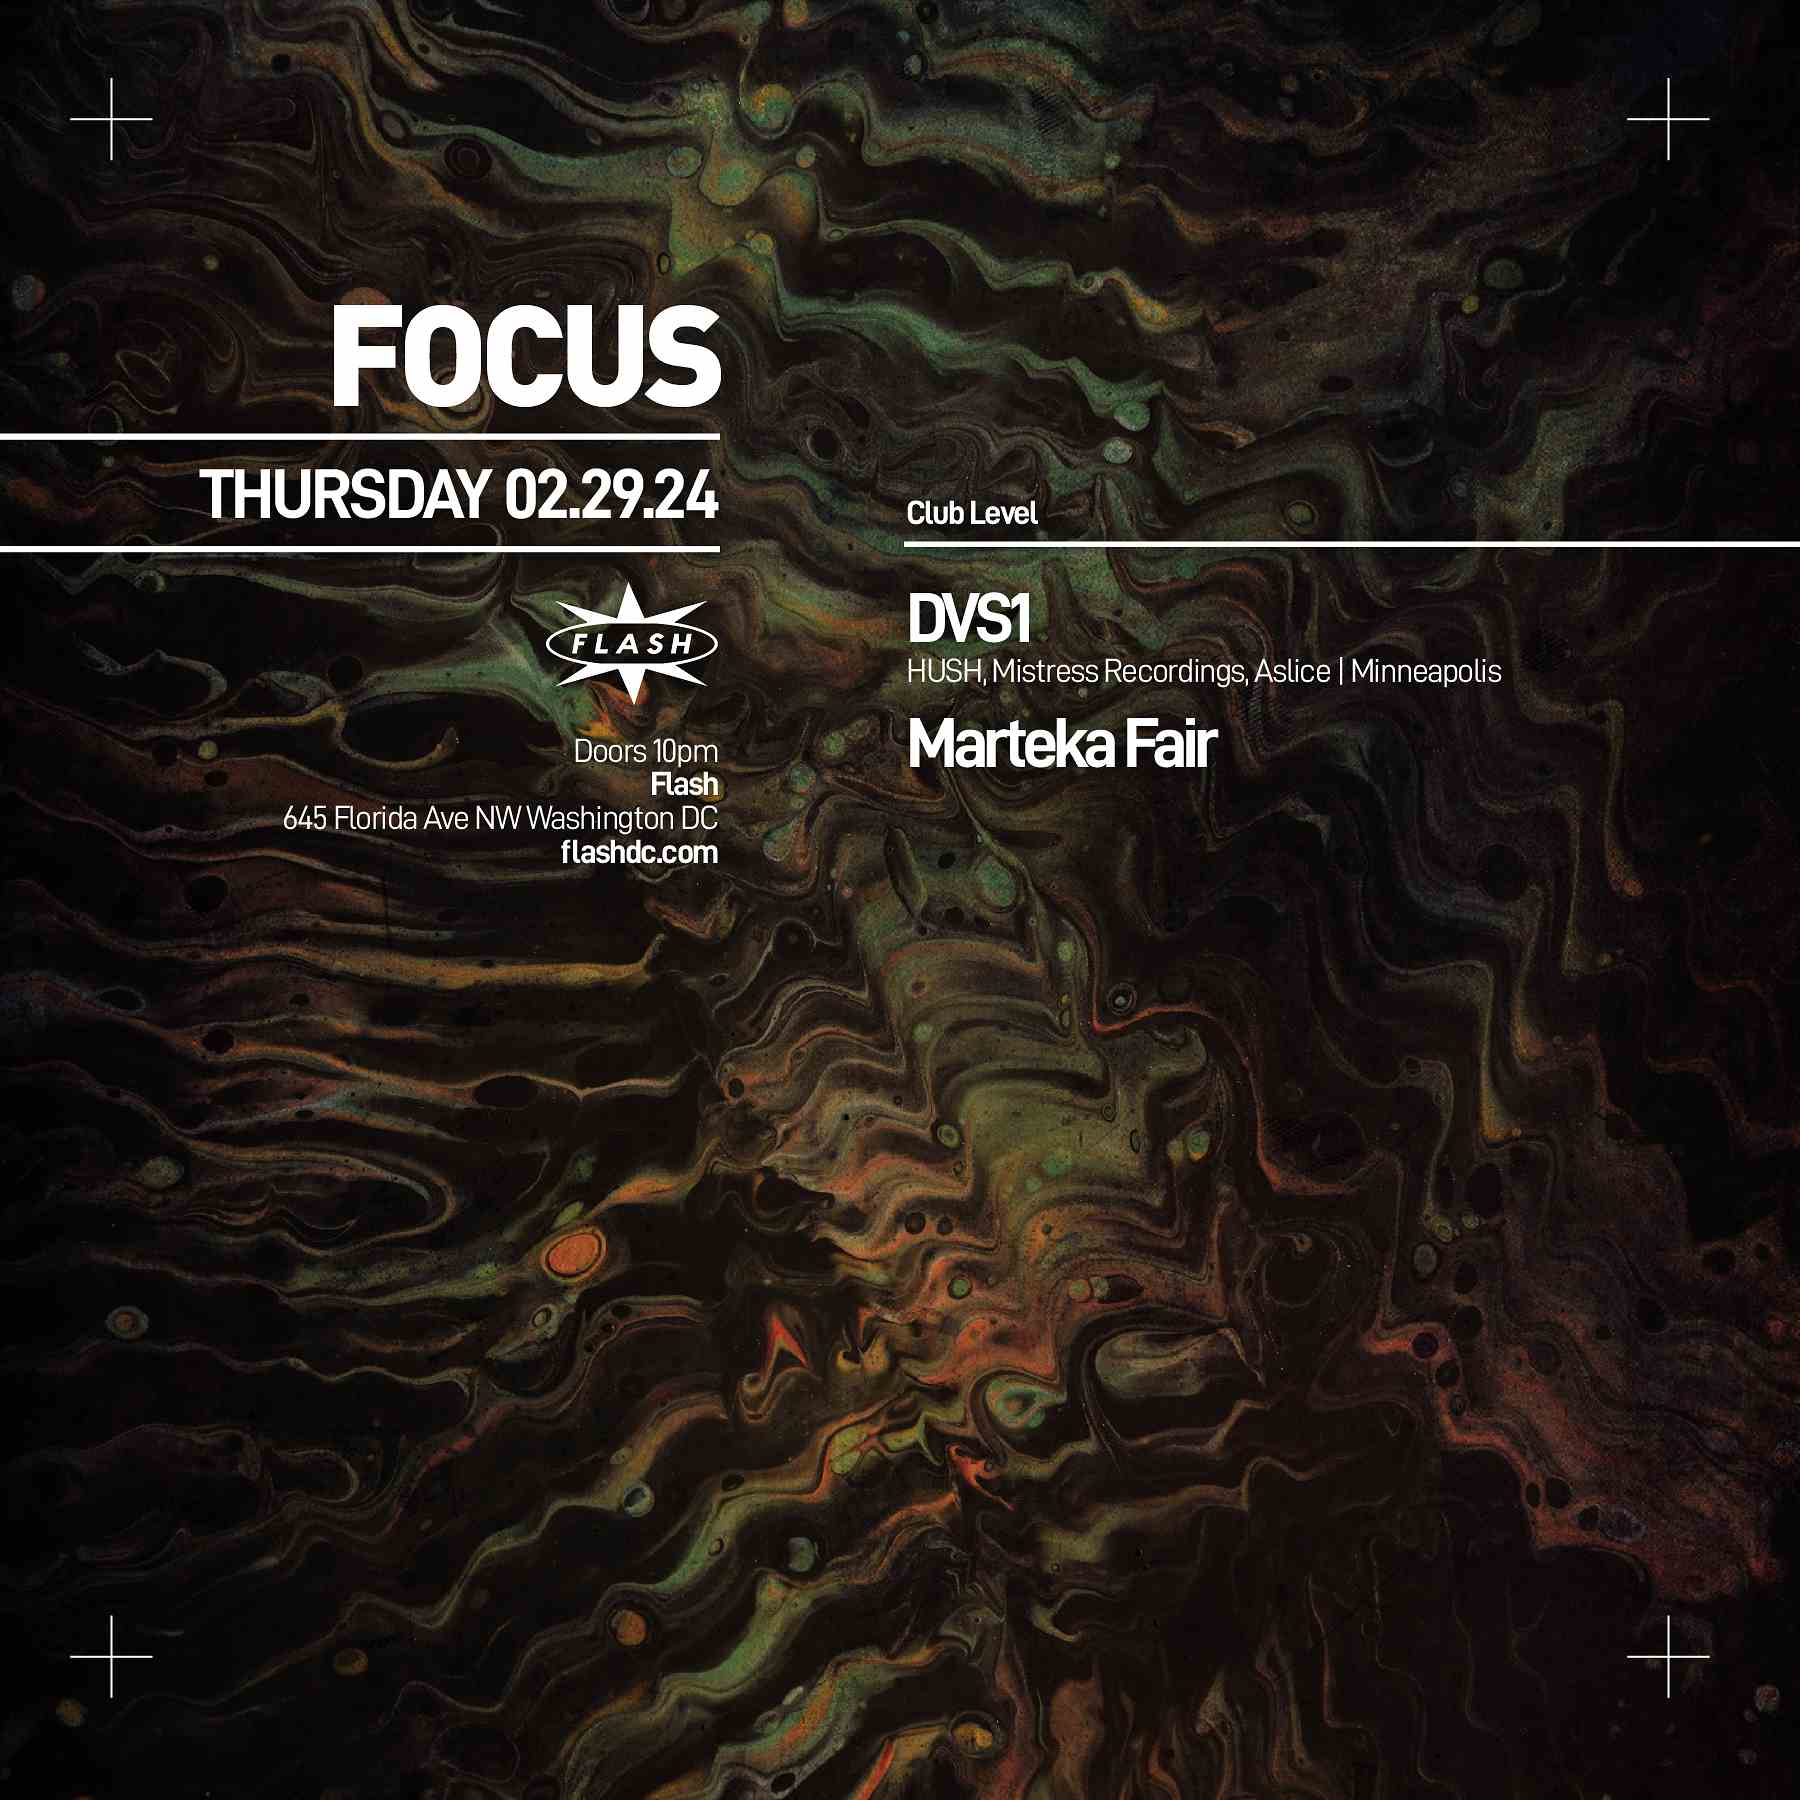 Event image for FOCUS: DVS1